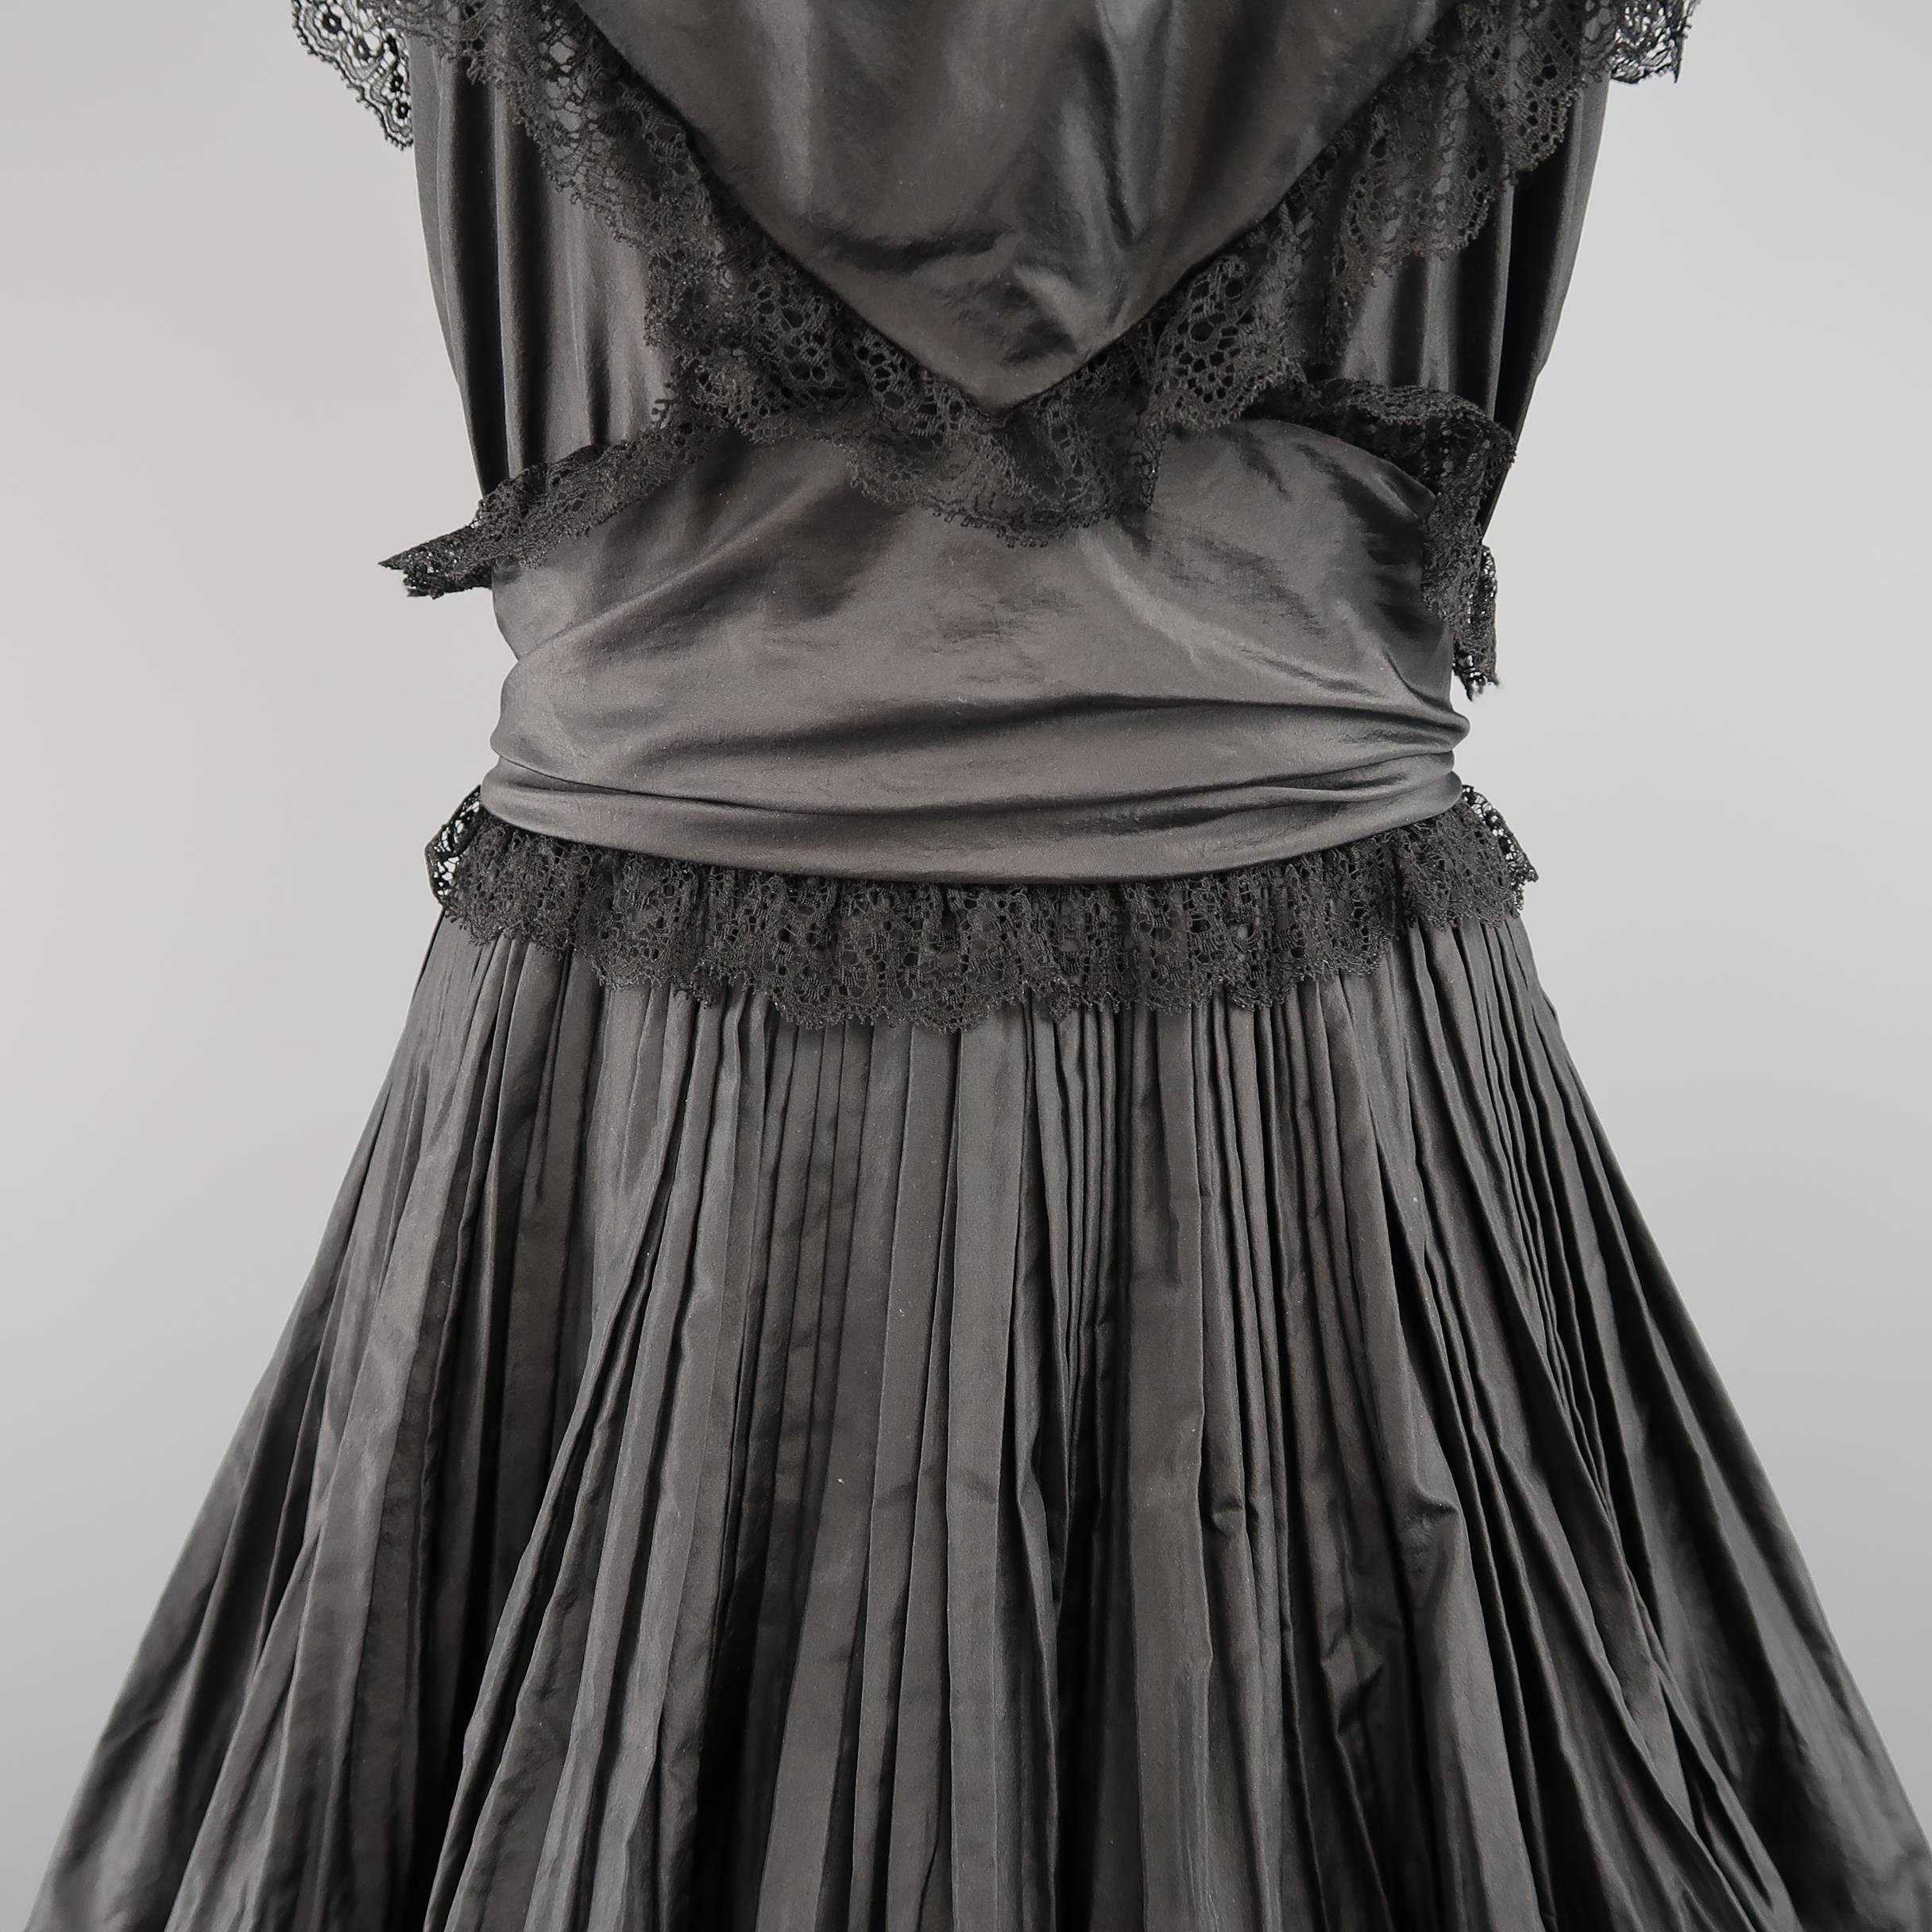 This gorgeous CHANEL cocktail dress comes in black silk taffeta with lace piping throughout and features a scarf panel front that ties in back, gathered sash waistband, and pleated poof bubble skirt with drop waist, bow detailed, pencil bottom.